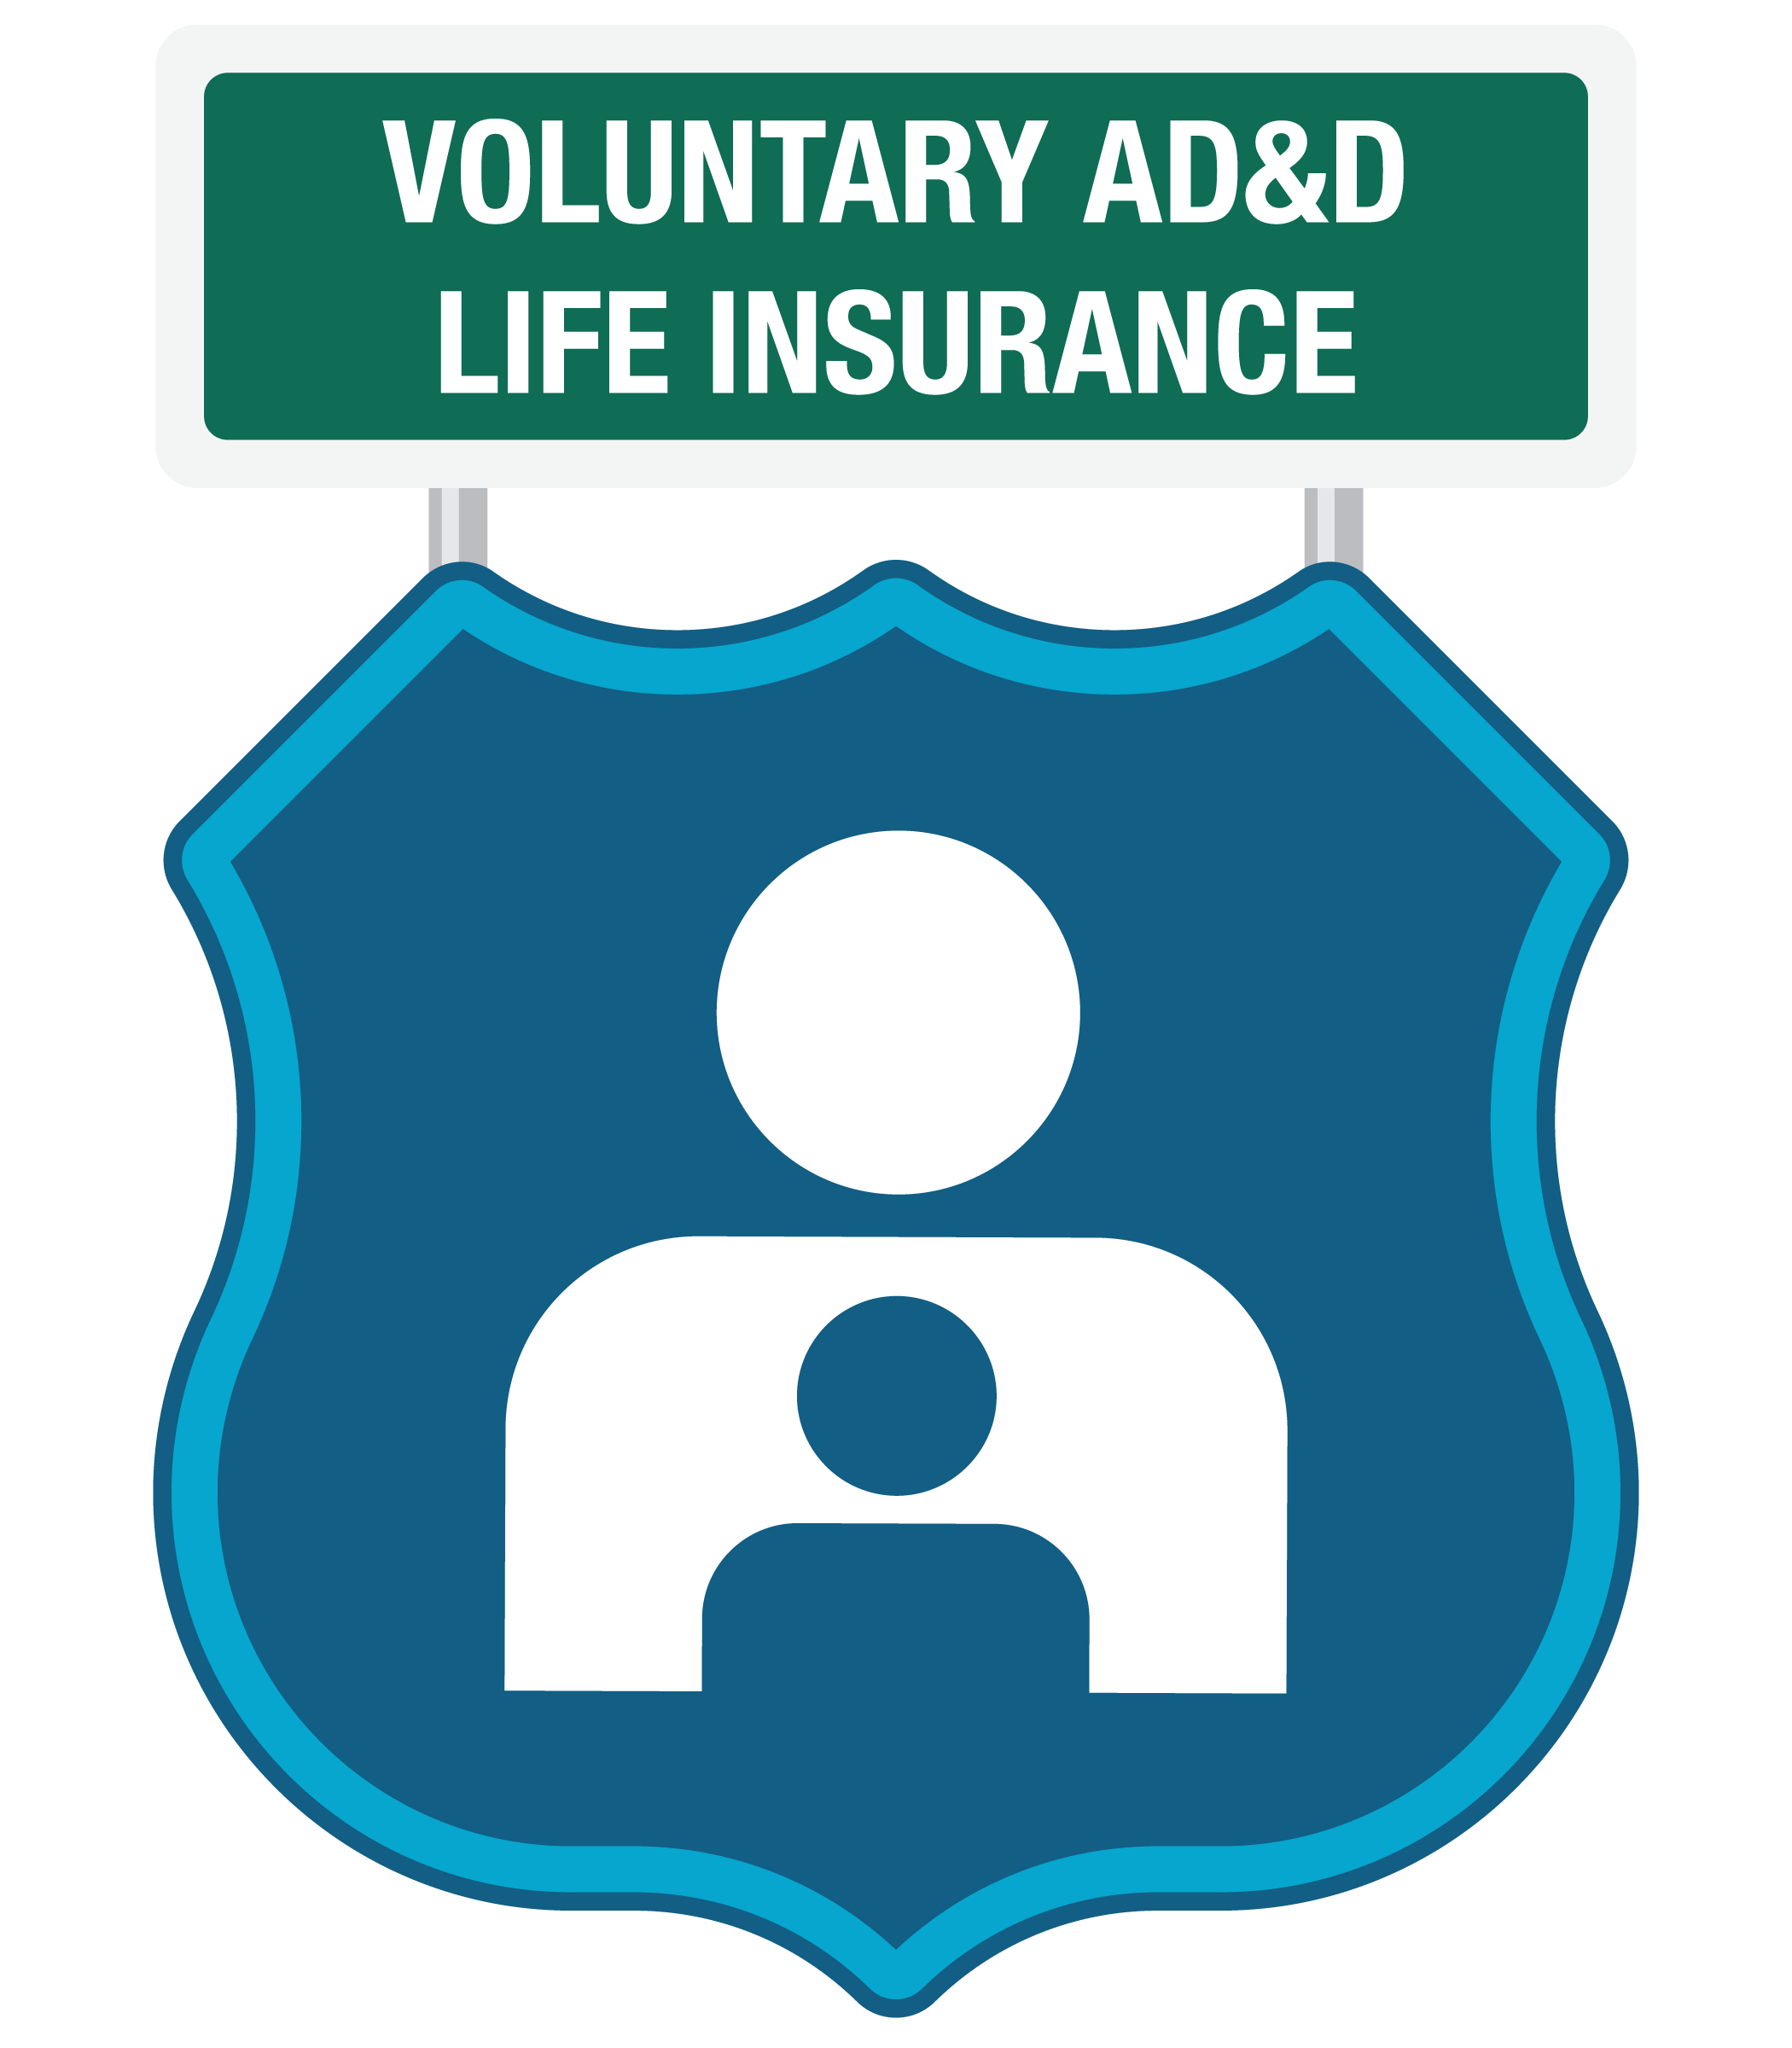 Voluntary Accidental Death and Disability Life Insurance